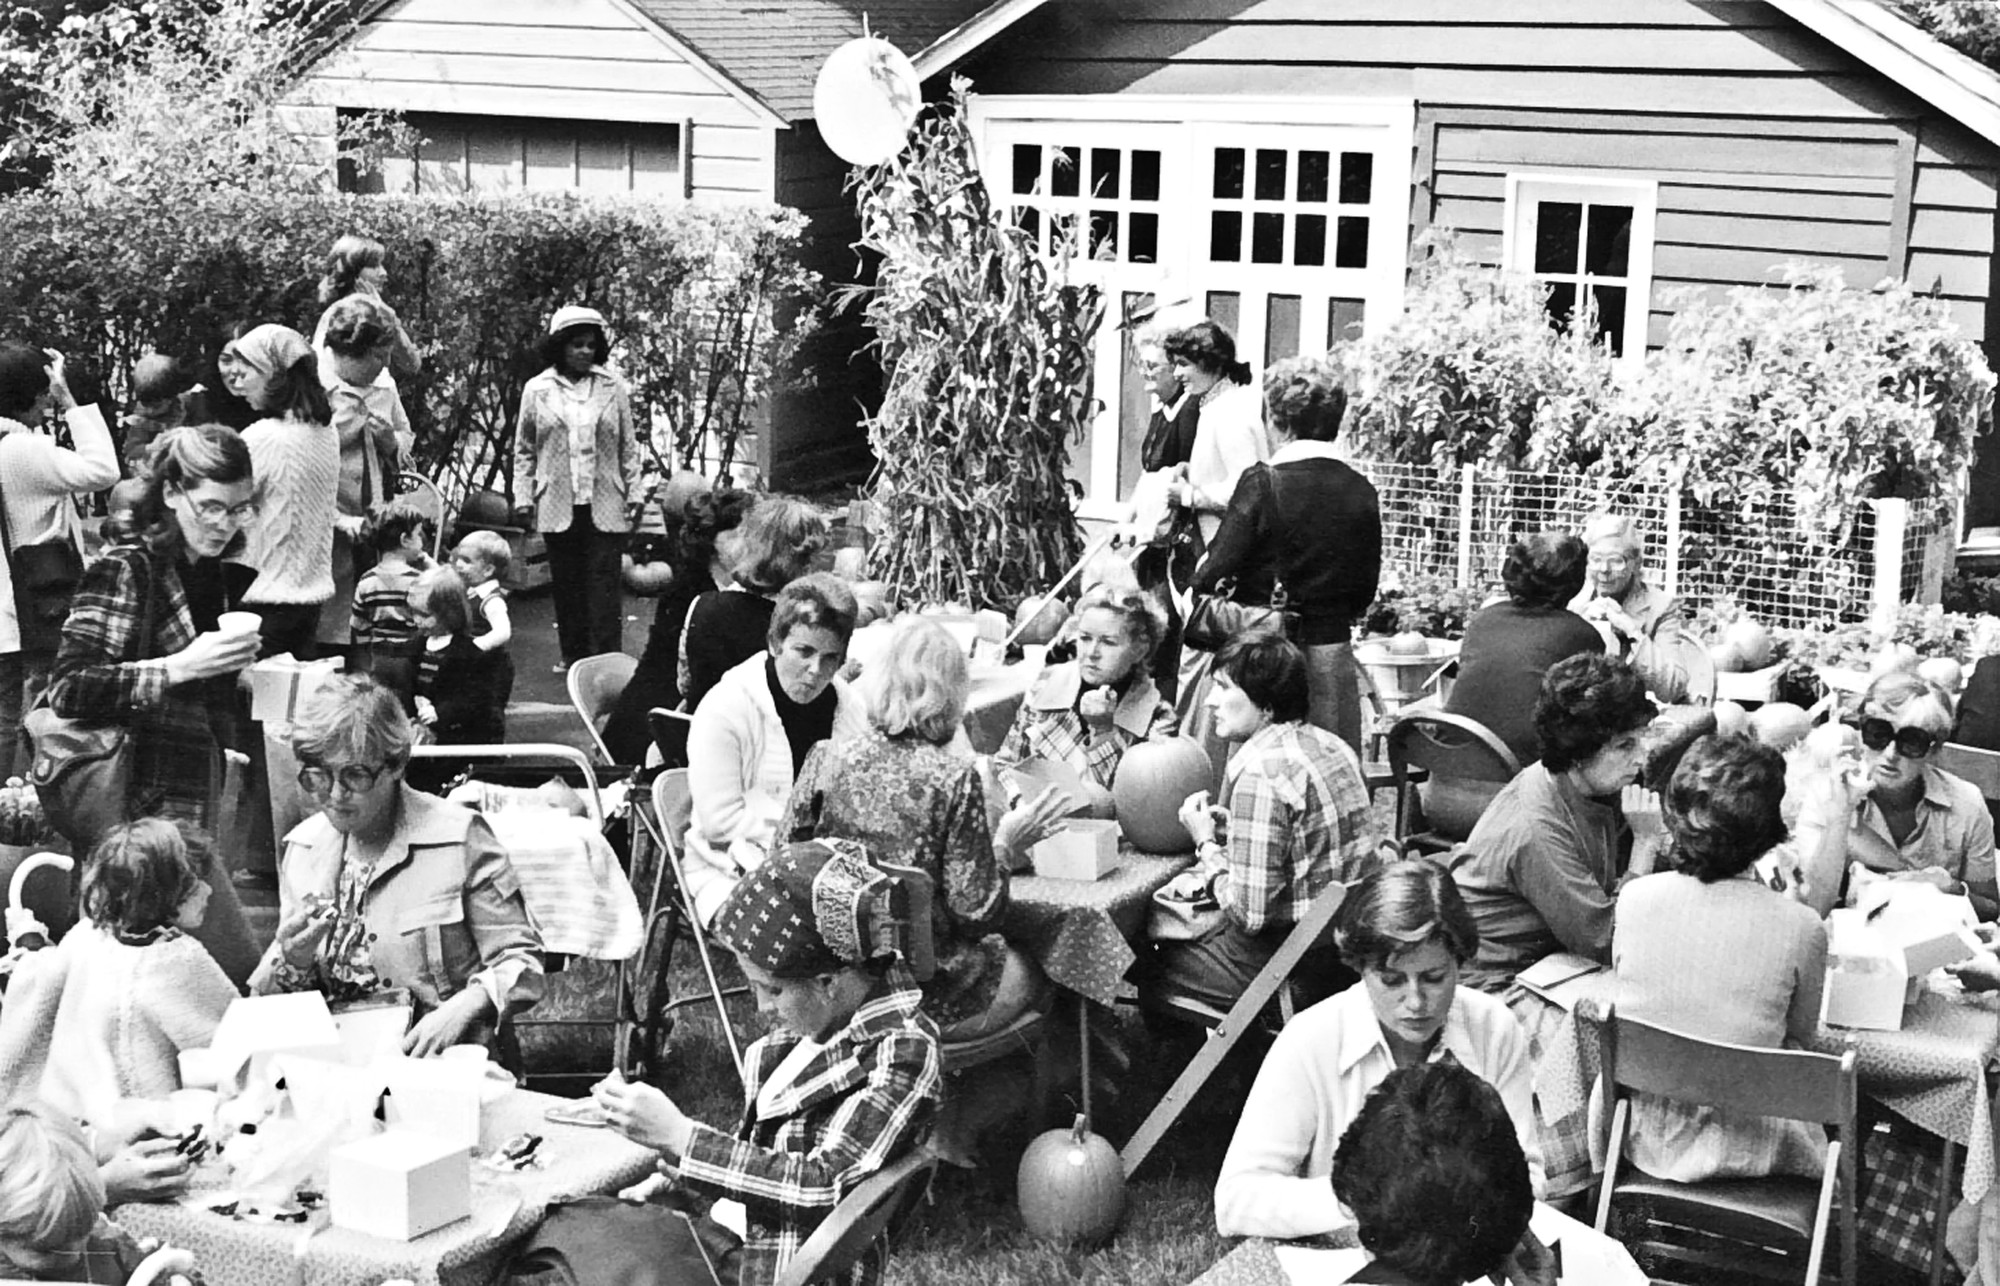 One of the first Garden Potpourris, from 1978. The events did well enough that the Mothers’ Club has been continuing the tradition for nearly 40 years.